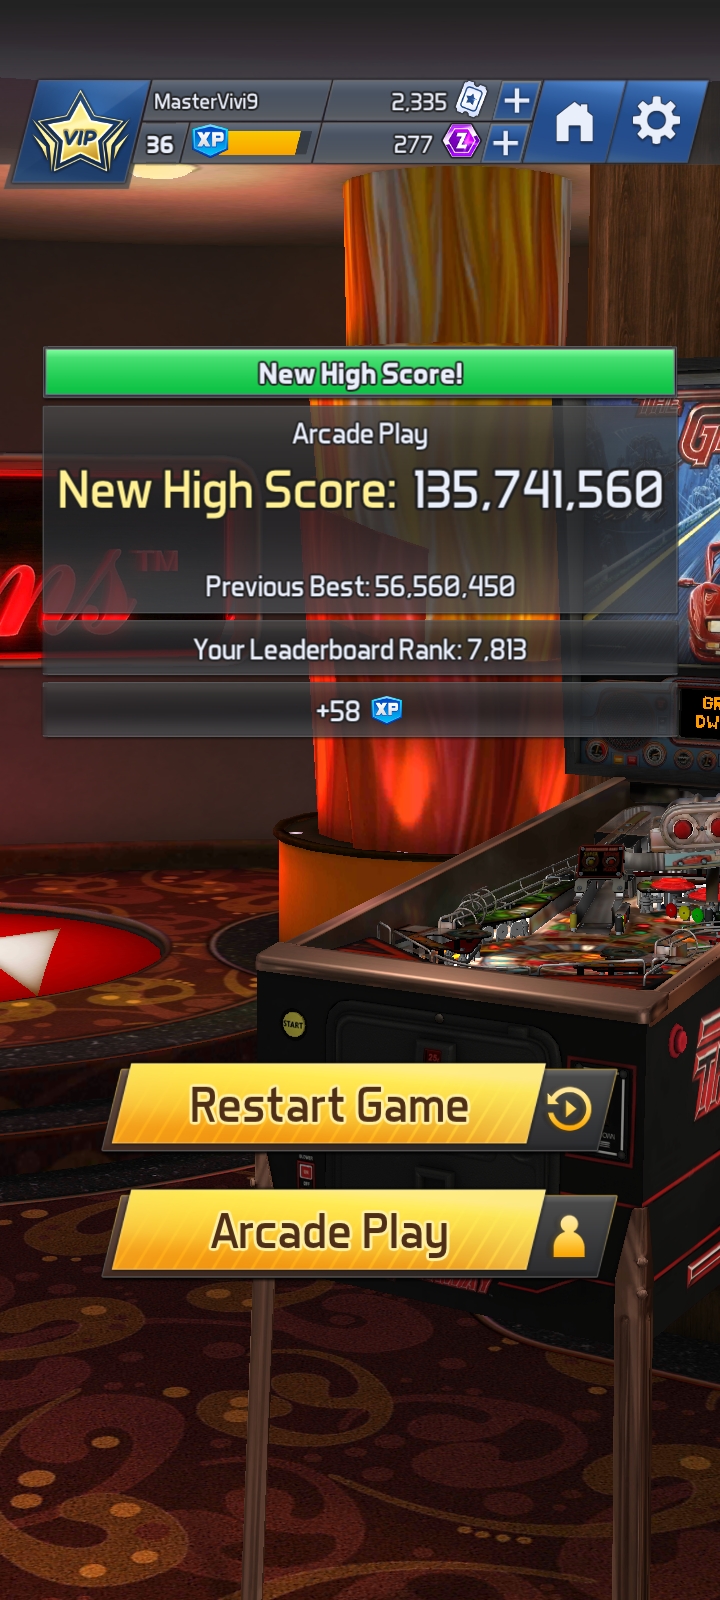 Hauntedprogram: Williams Pinball: The Getaway [Arcade Play] (Android) 135,741,560 points on 2022-10-22 16:07:13